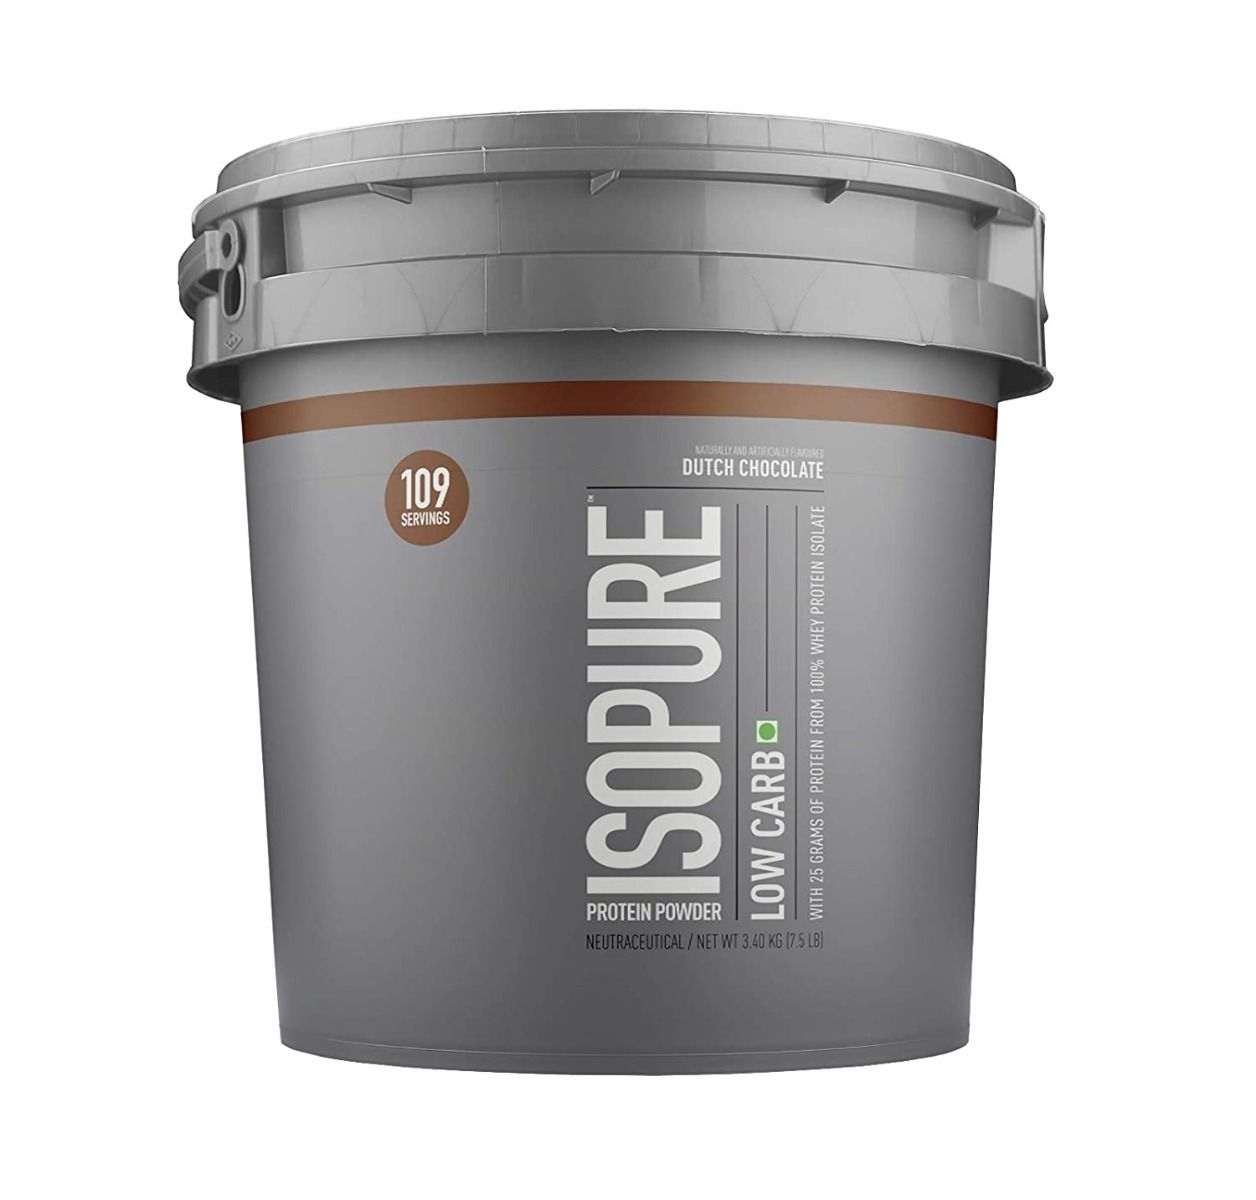 Isopure Low Carb Dutch Chocolate Flavoured Powder, 7.5 lb, Pack of 1 